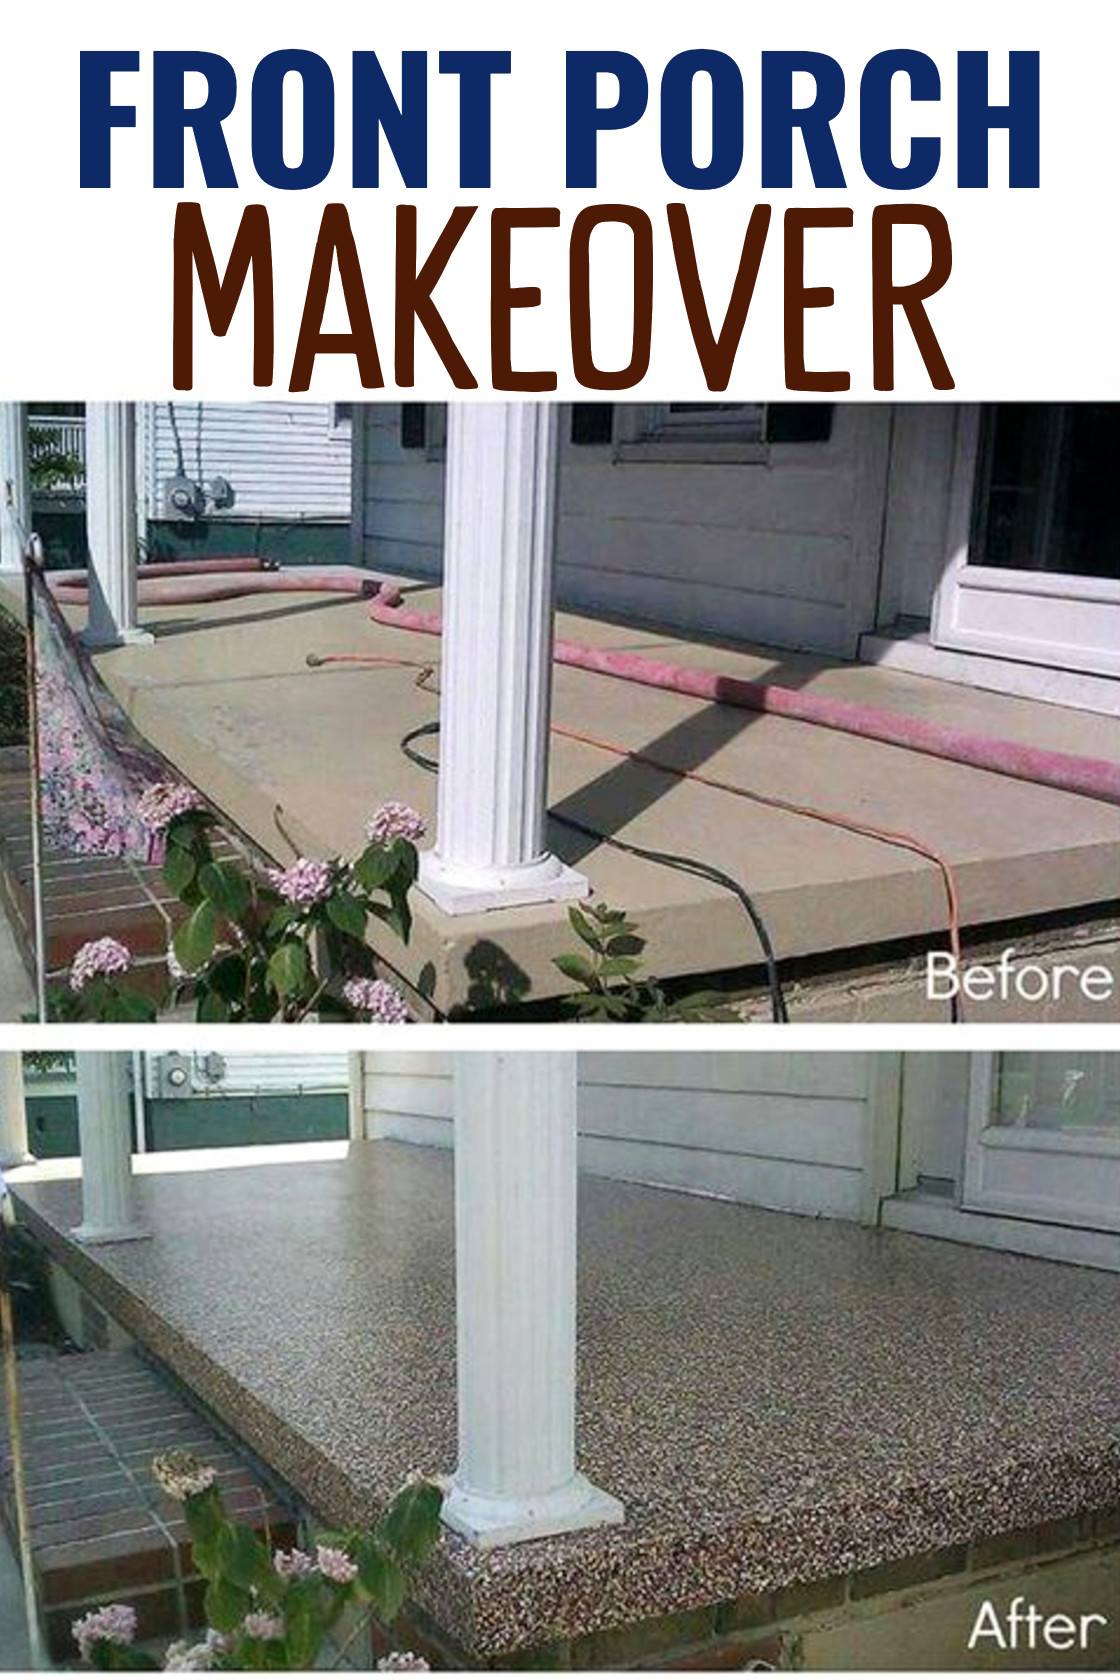 Ugly Concrete Patio and Porch Floor Makeover Ideas, Tips & Before/After Pictures